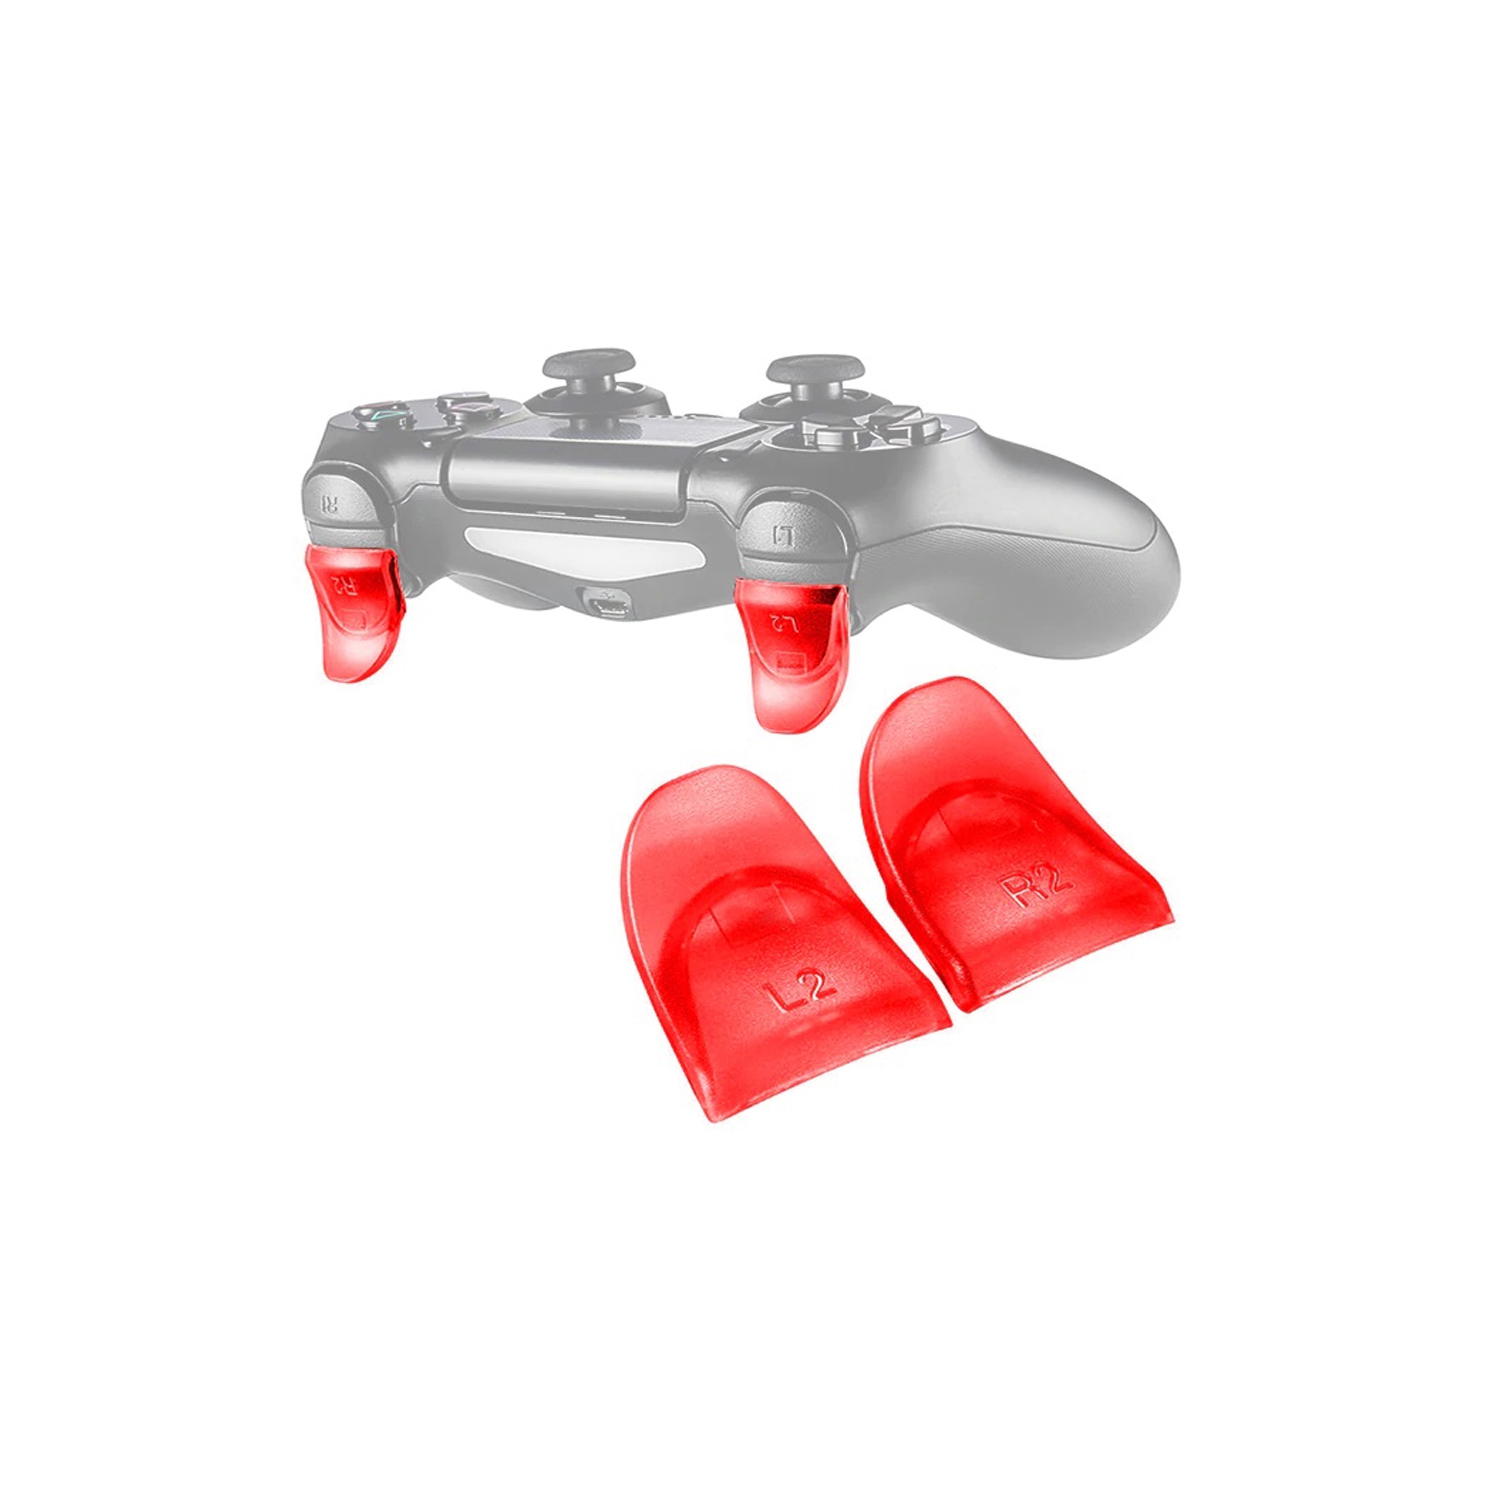 L2 R2 Buttons Extension Trigger 1 Pair For PlayStation 4 / PS4 Slim / PS4 Pro DualShock 4 DS4 V1 V2 Controllers - Red